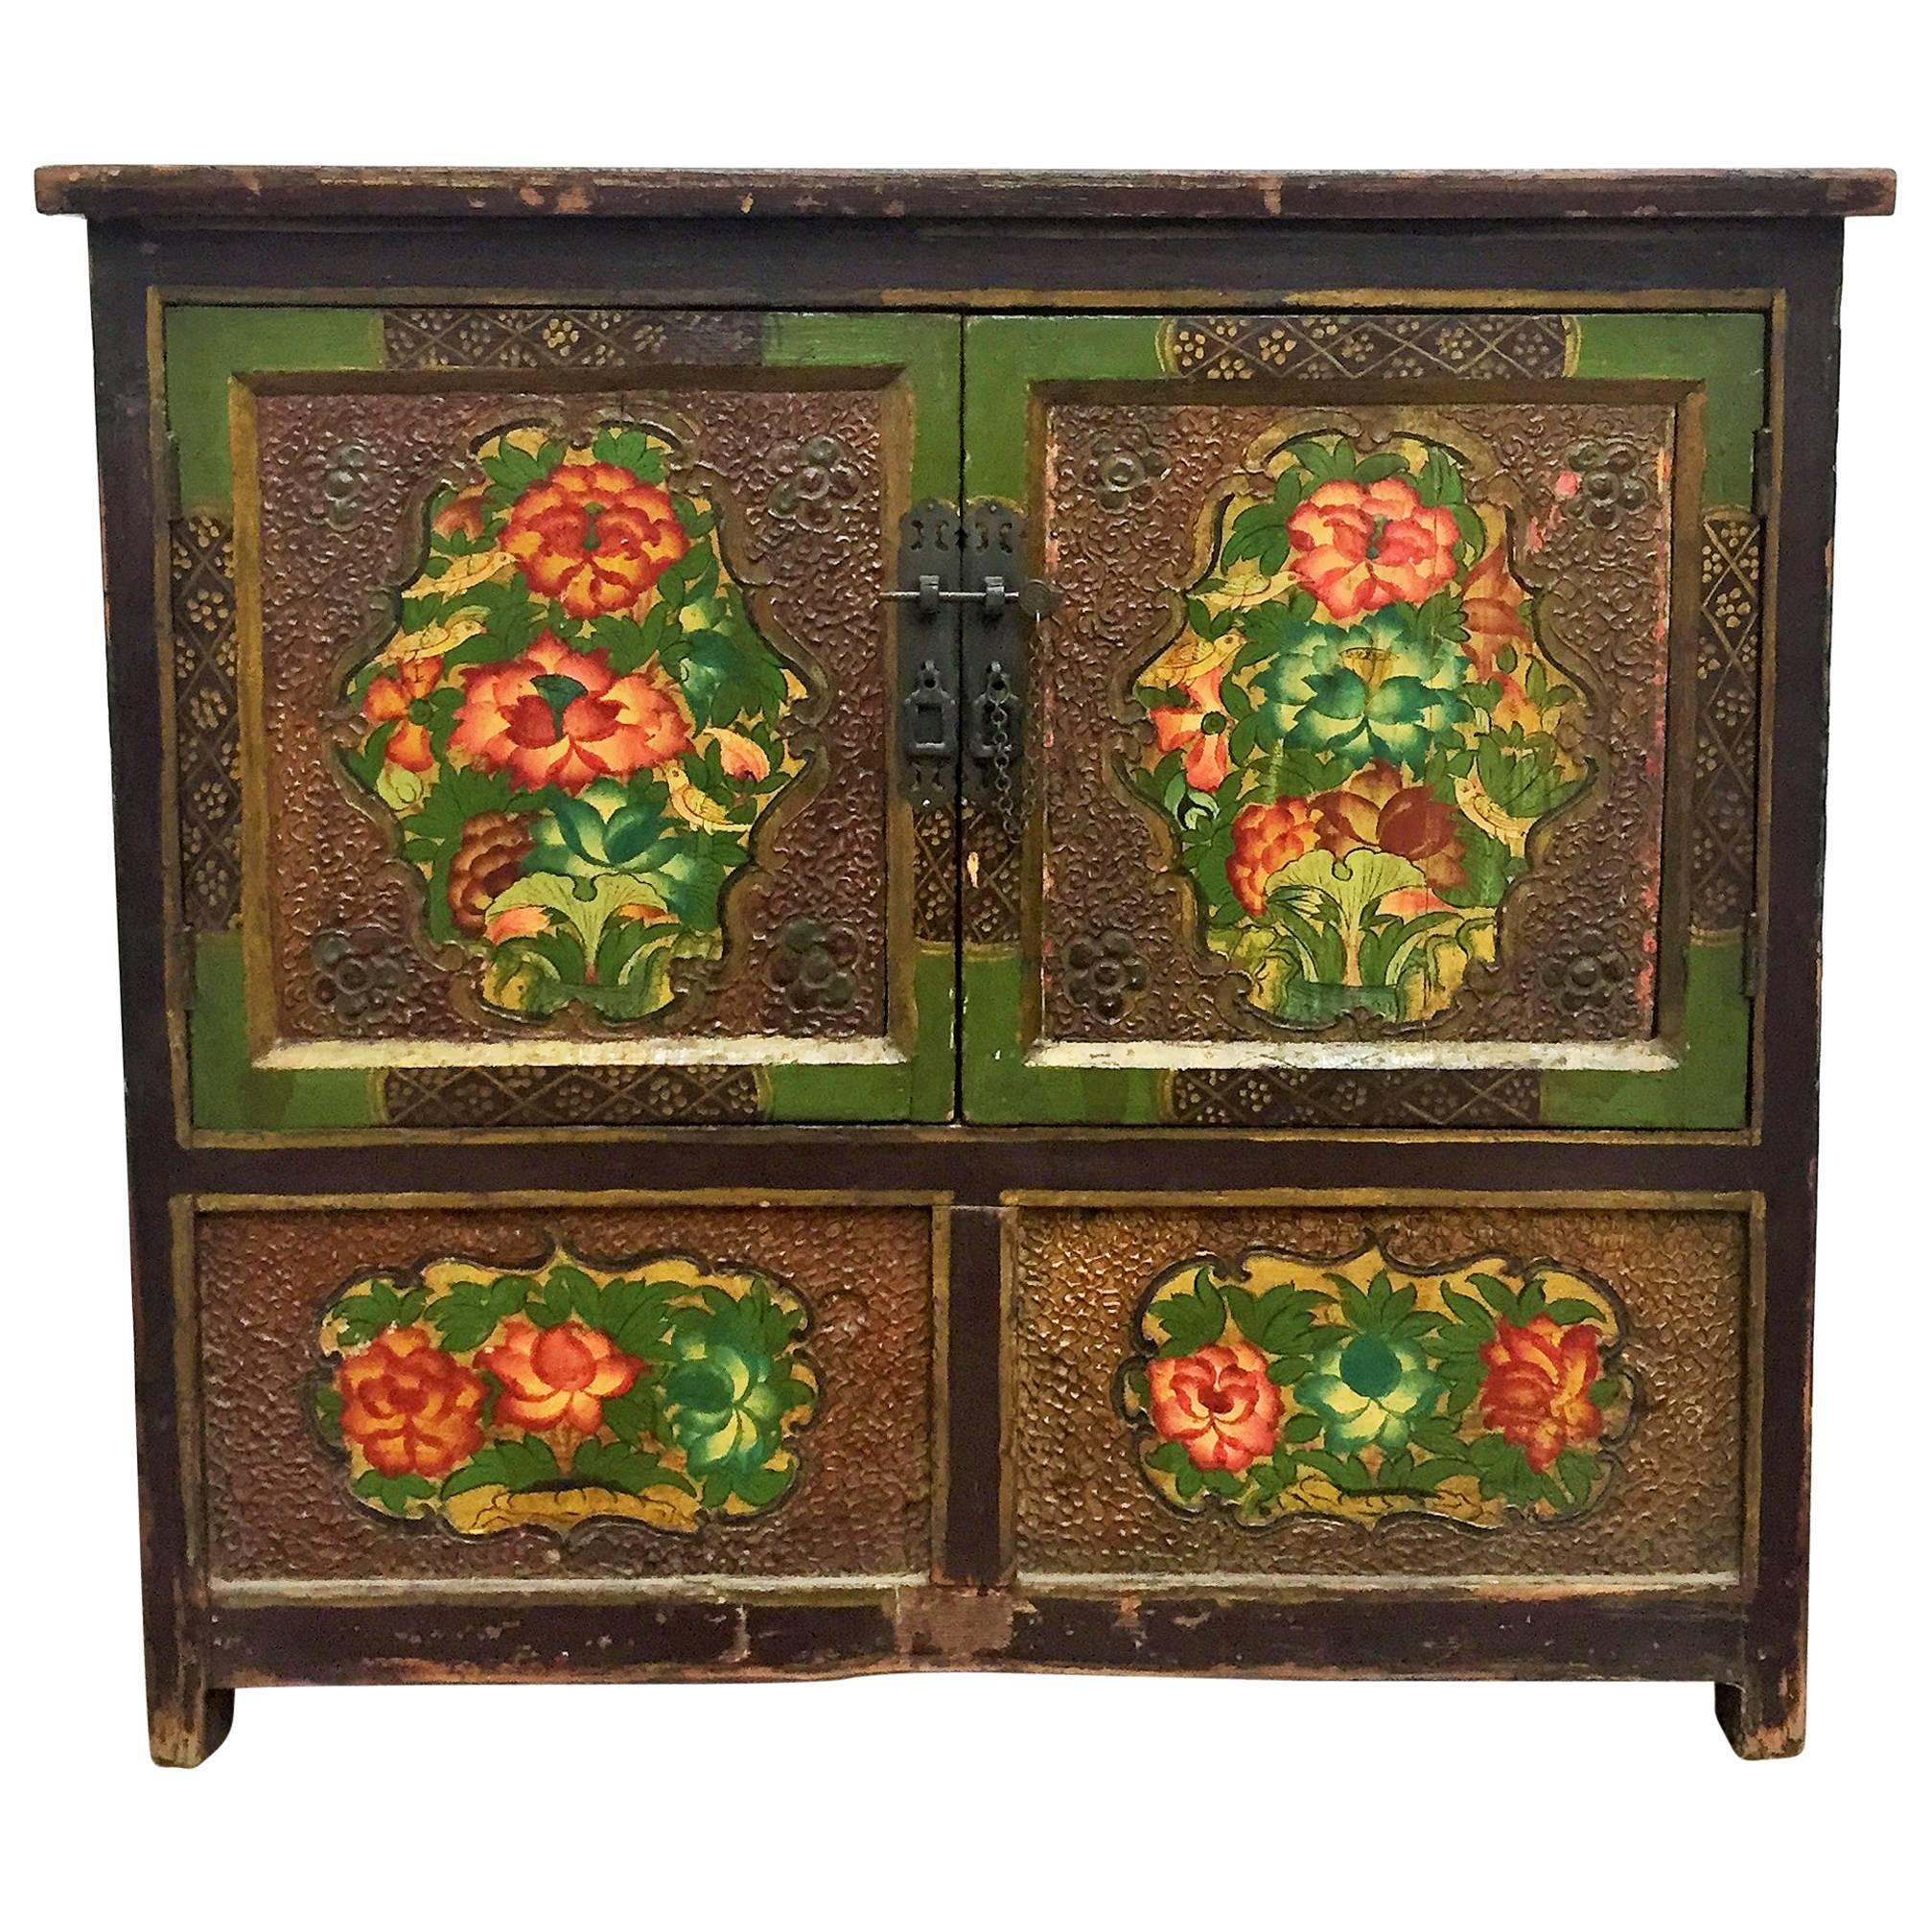 Antique Striking Lacquered Chinese Sideboard, circa 1800s